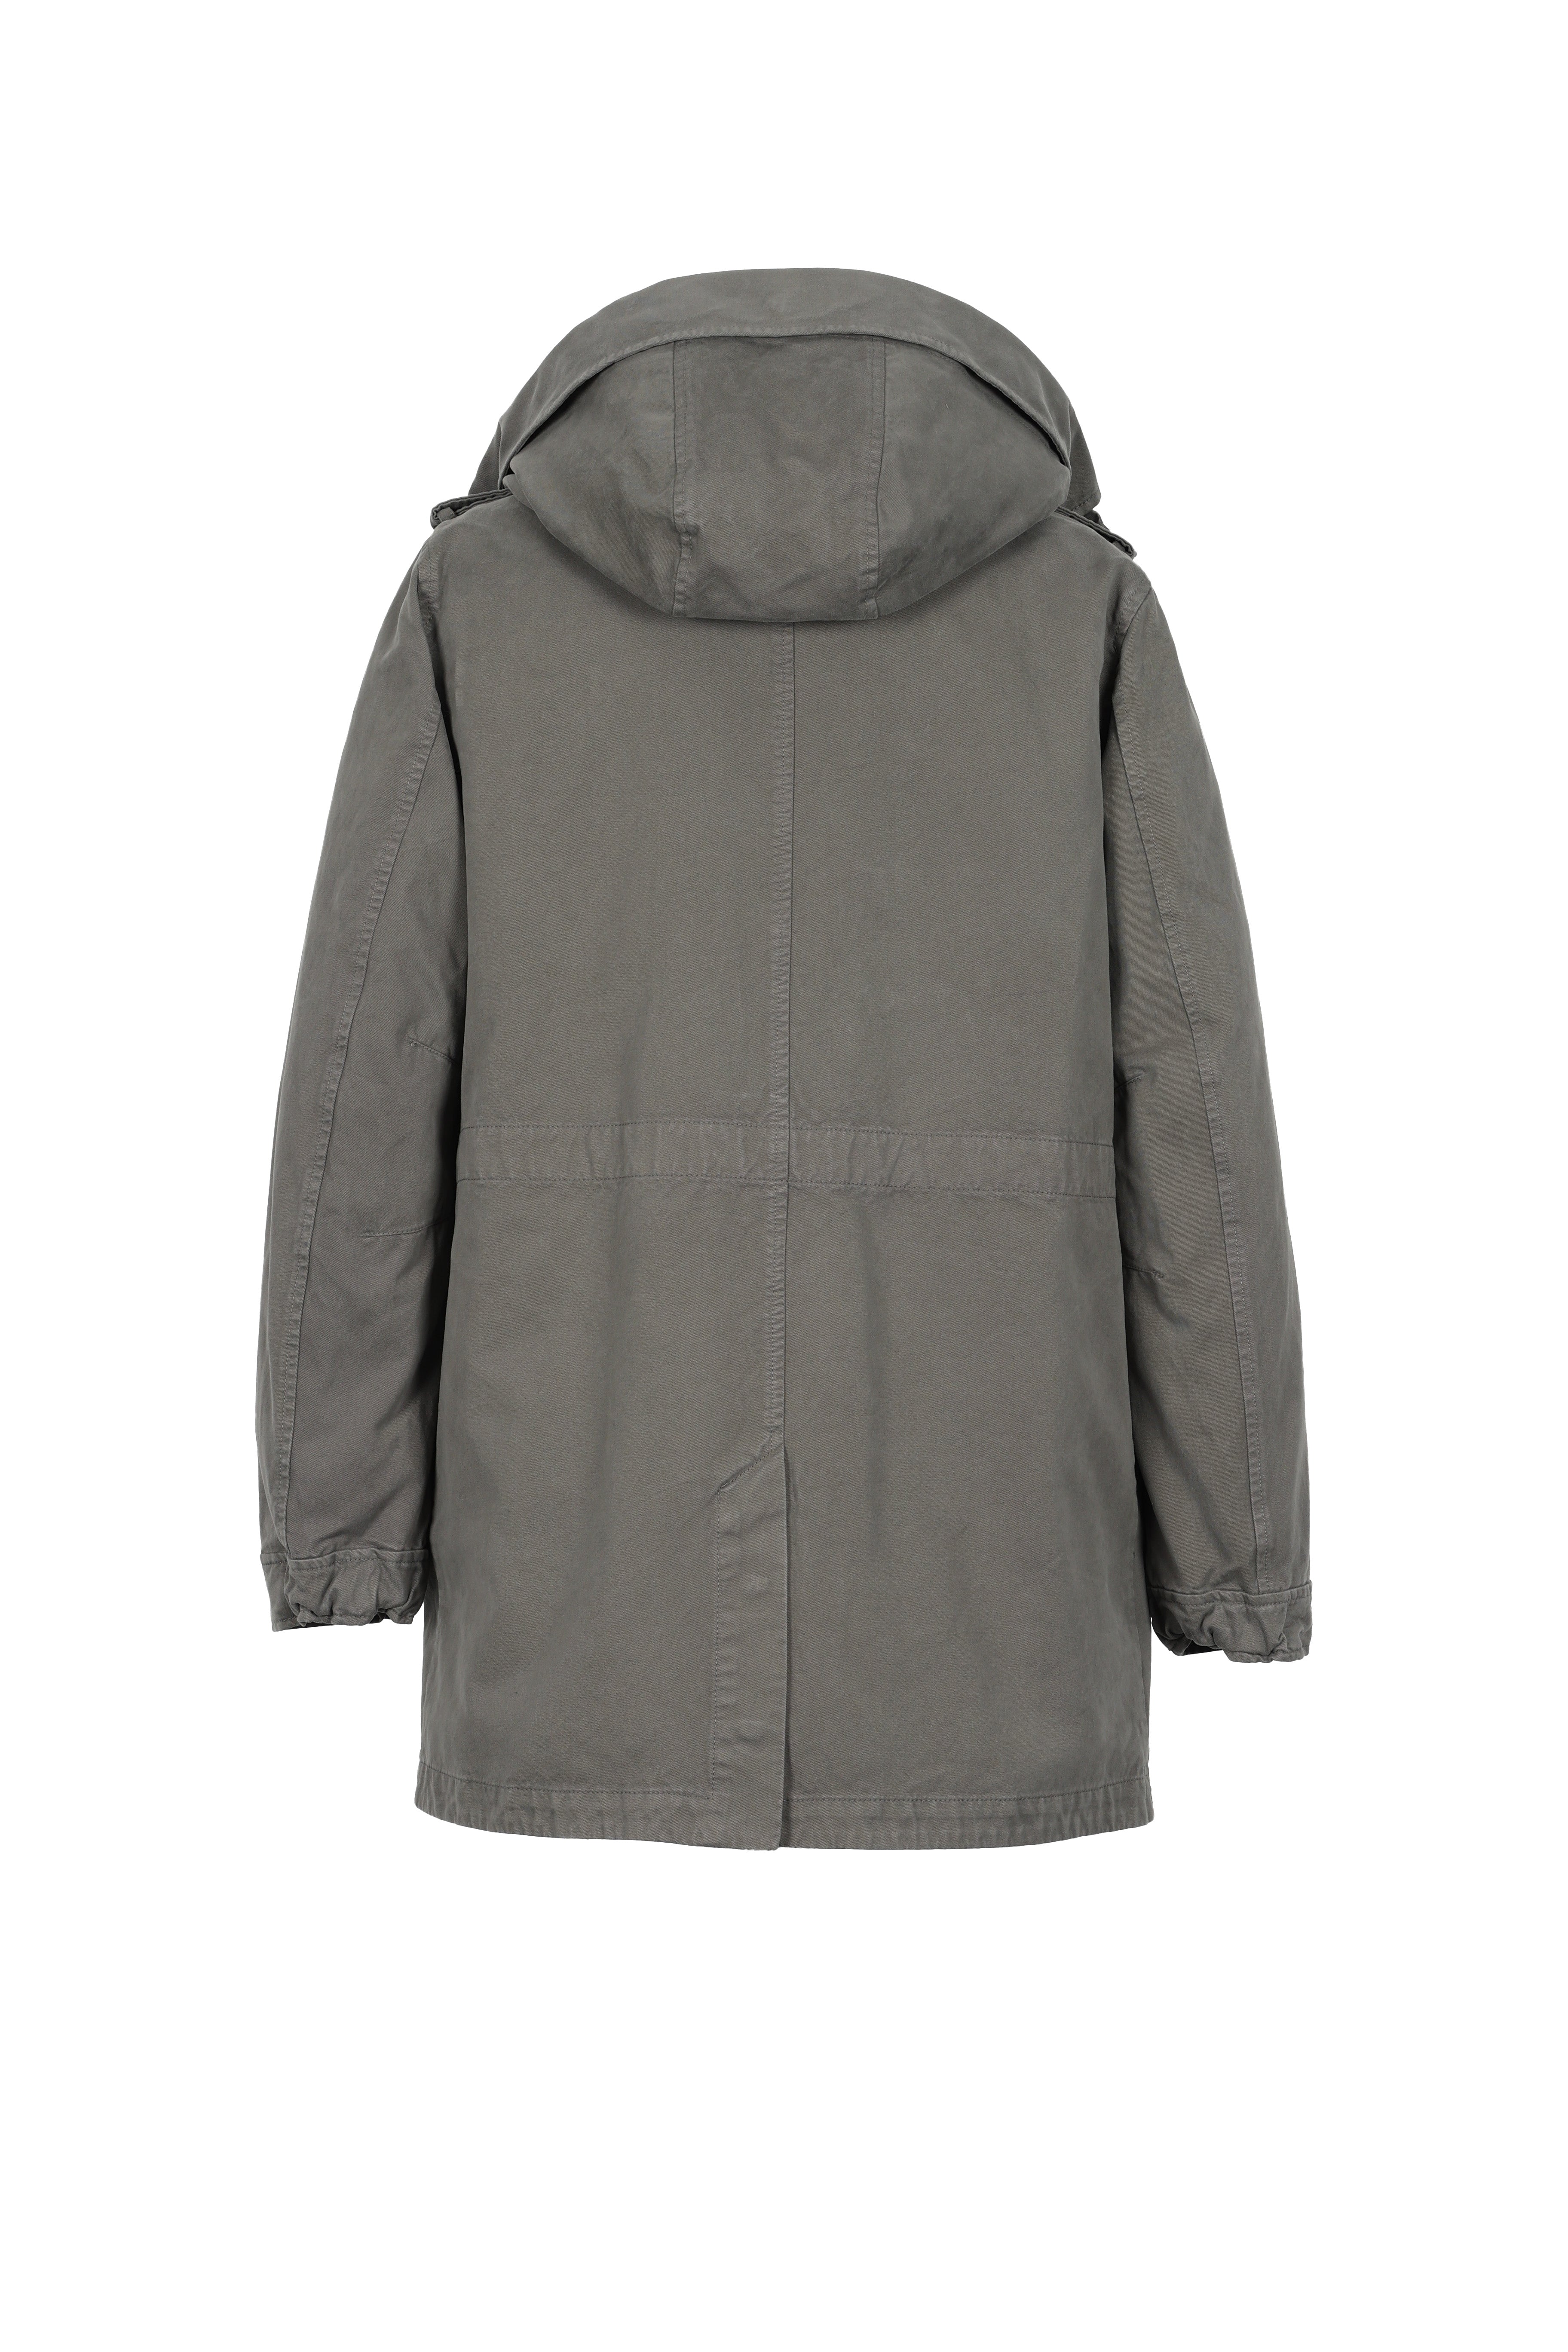 Lempelius Mens cotton Parka with vegan padding in military green